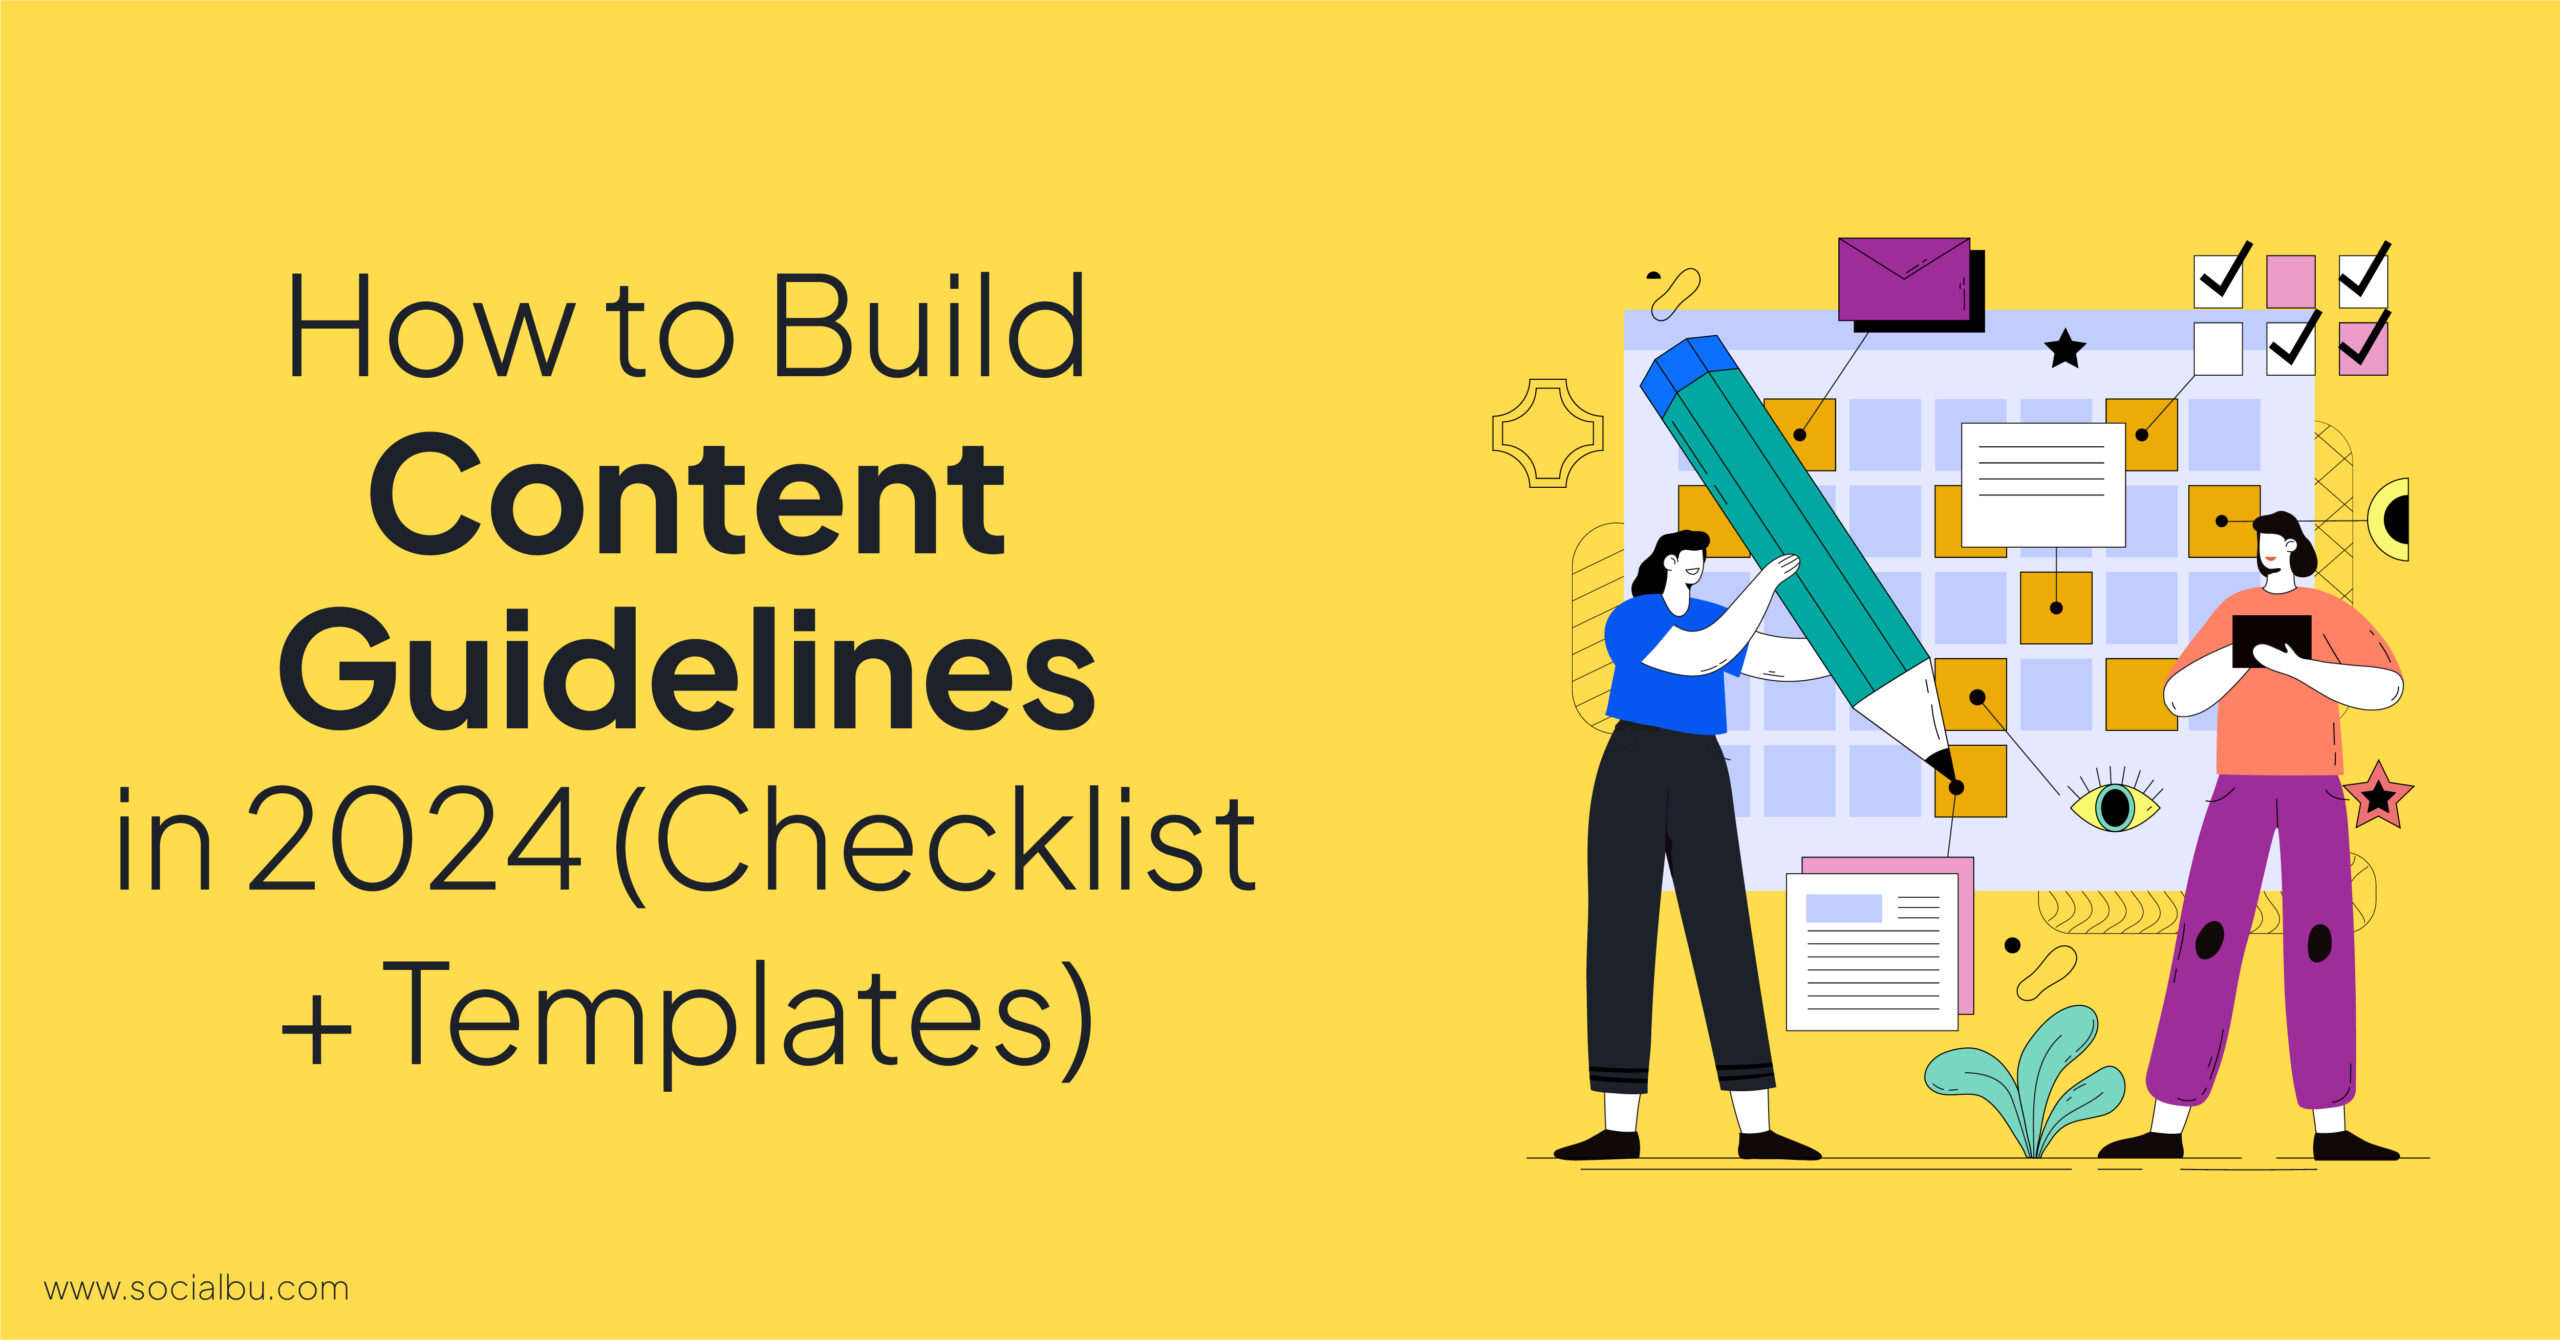 Content guidelines